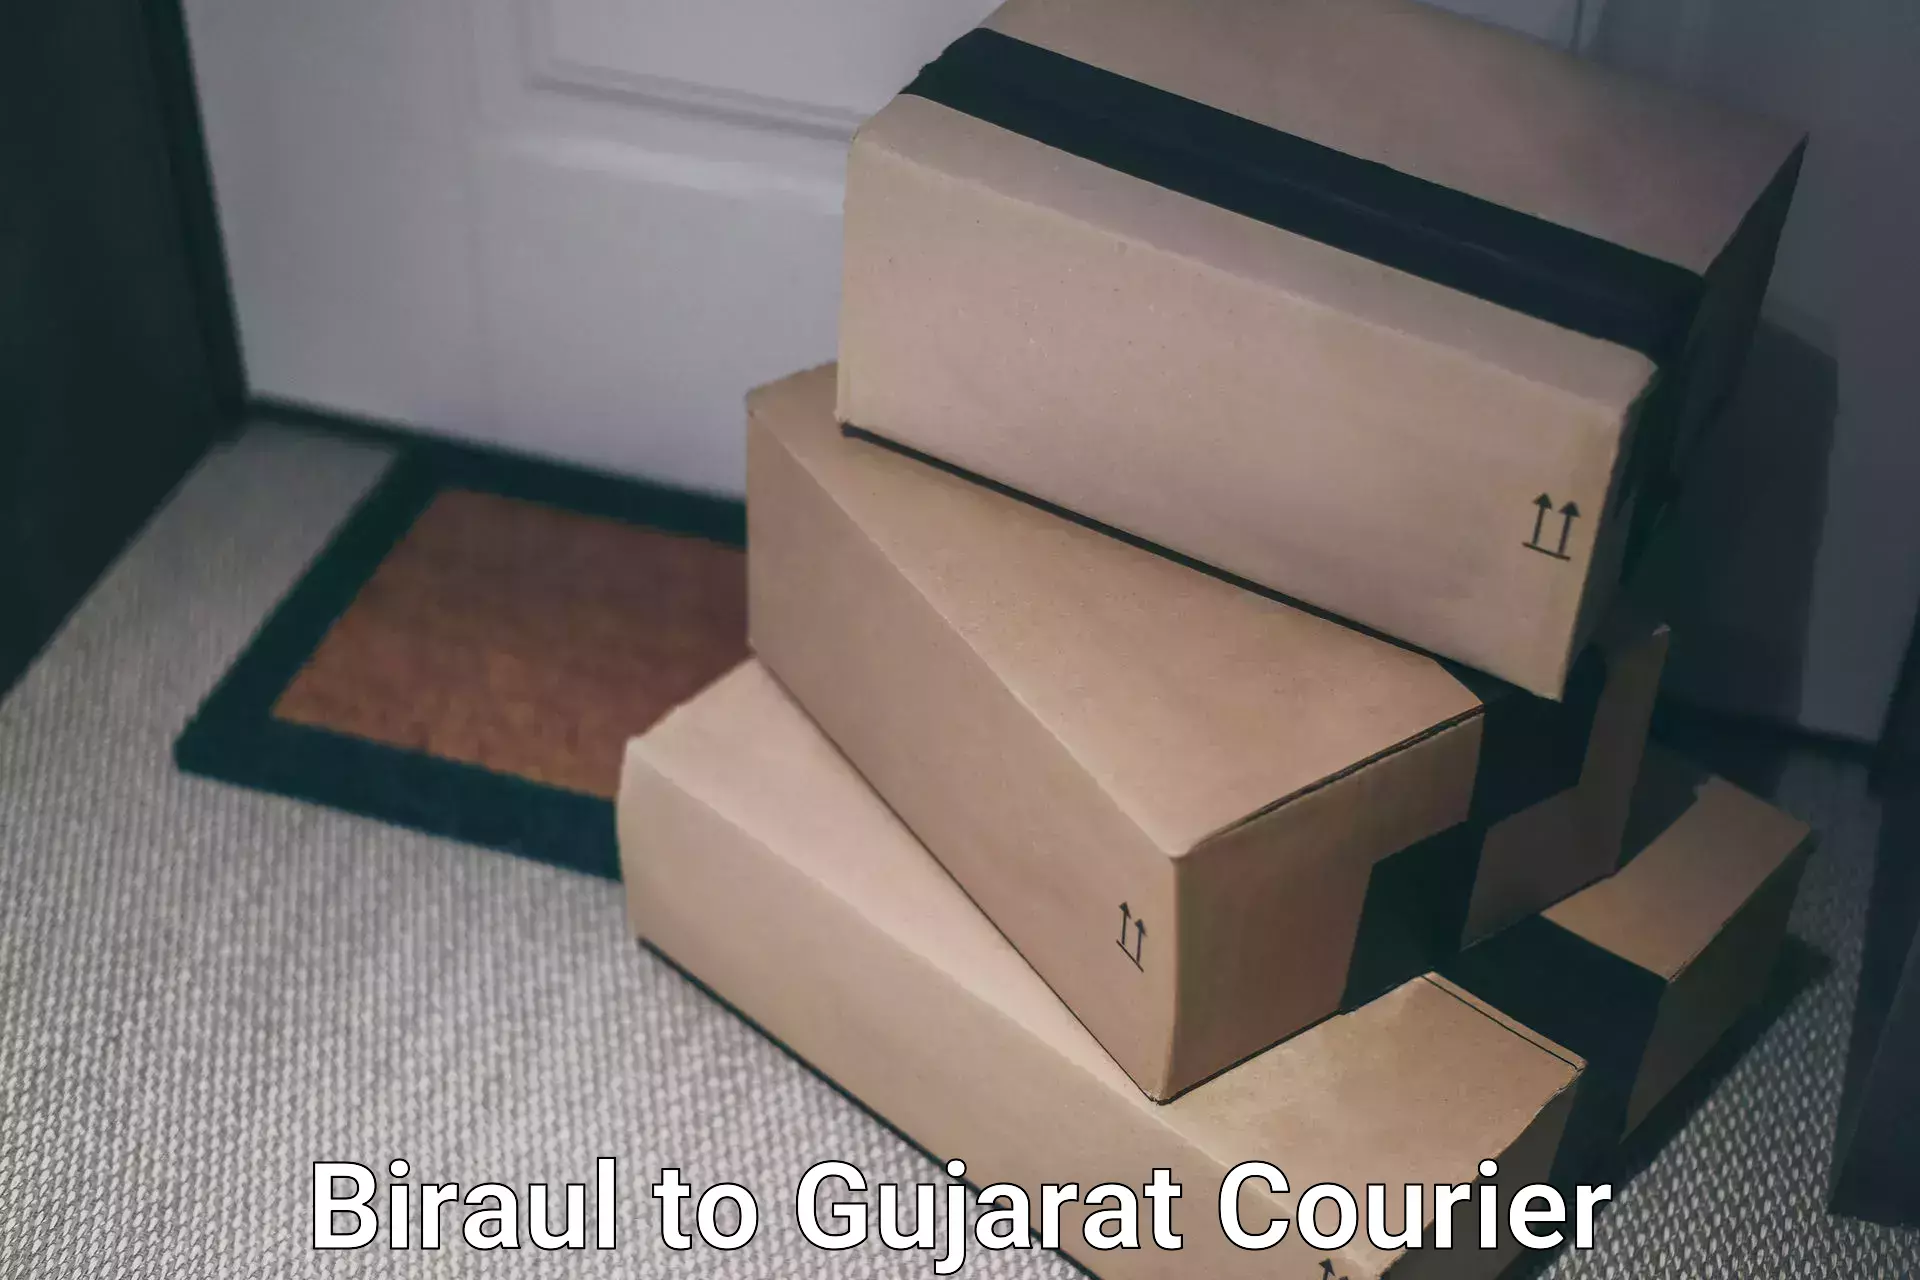 Courier service innovation Biraul to Bayad